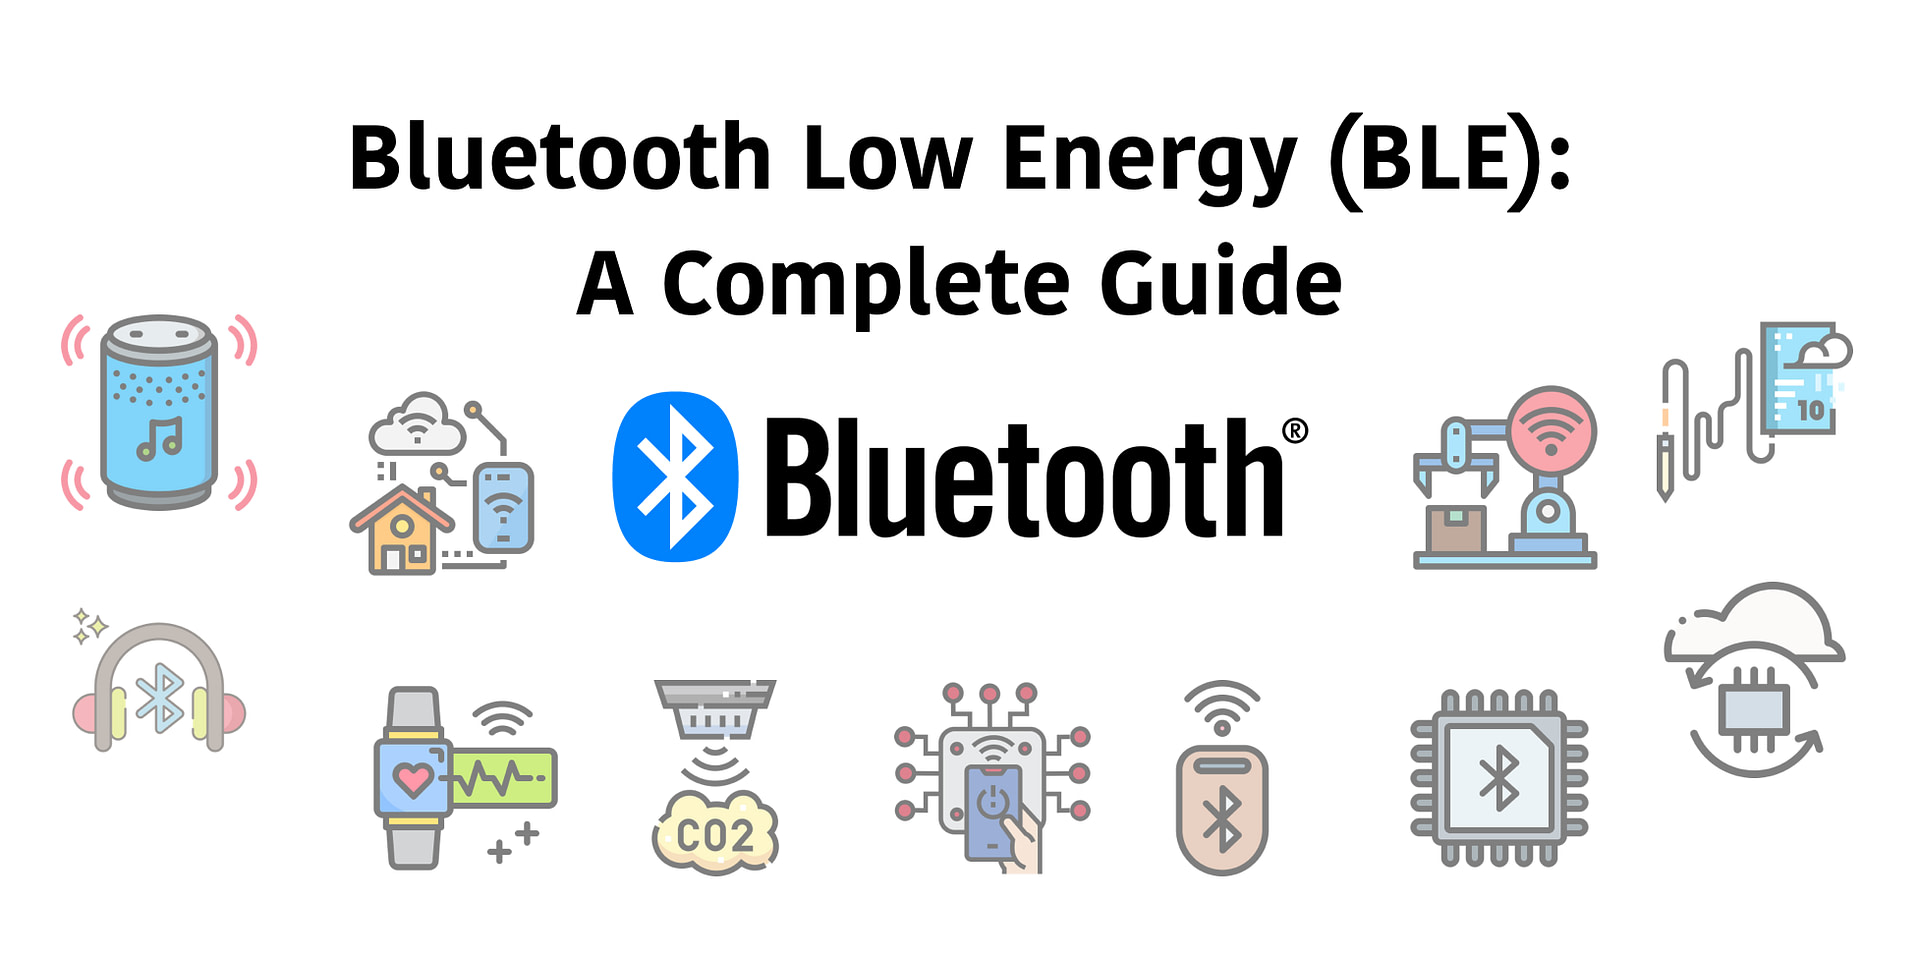 How to Detect Bluetooth Low Energy Devices in Realtime with Blue